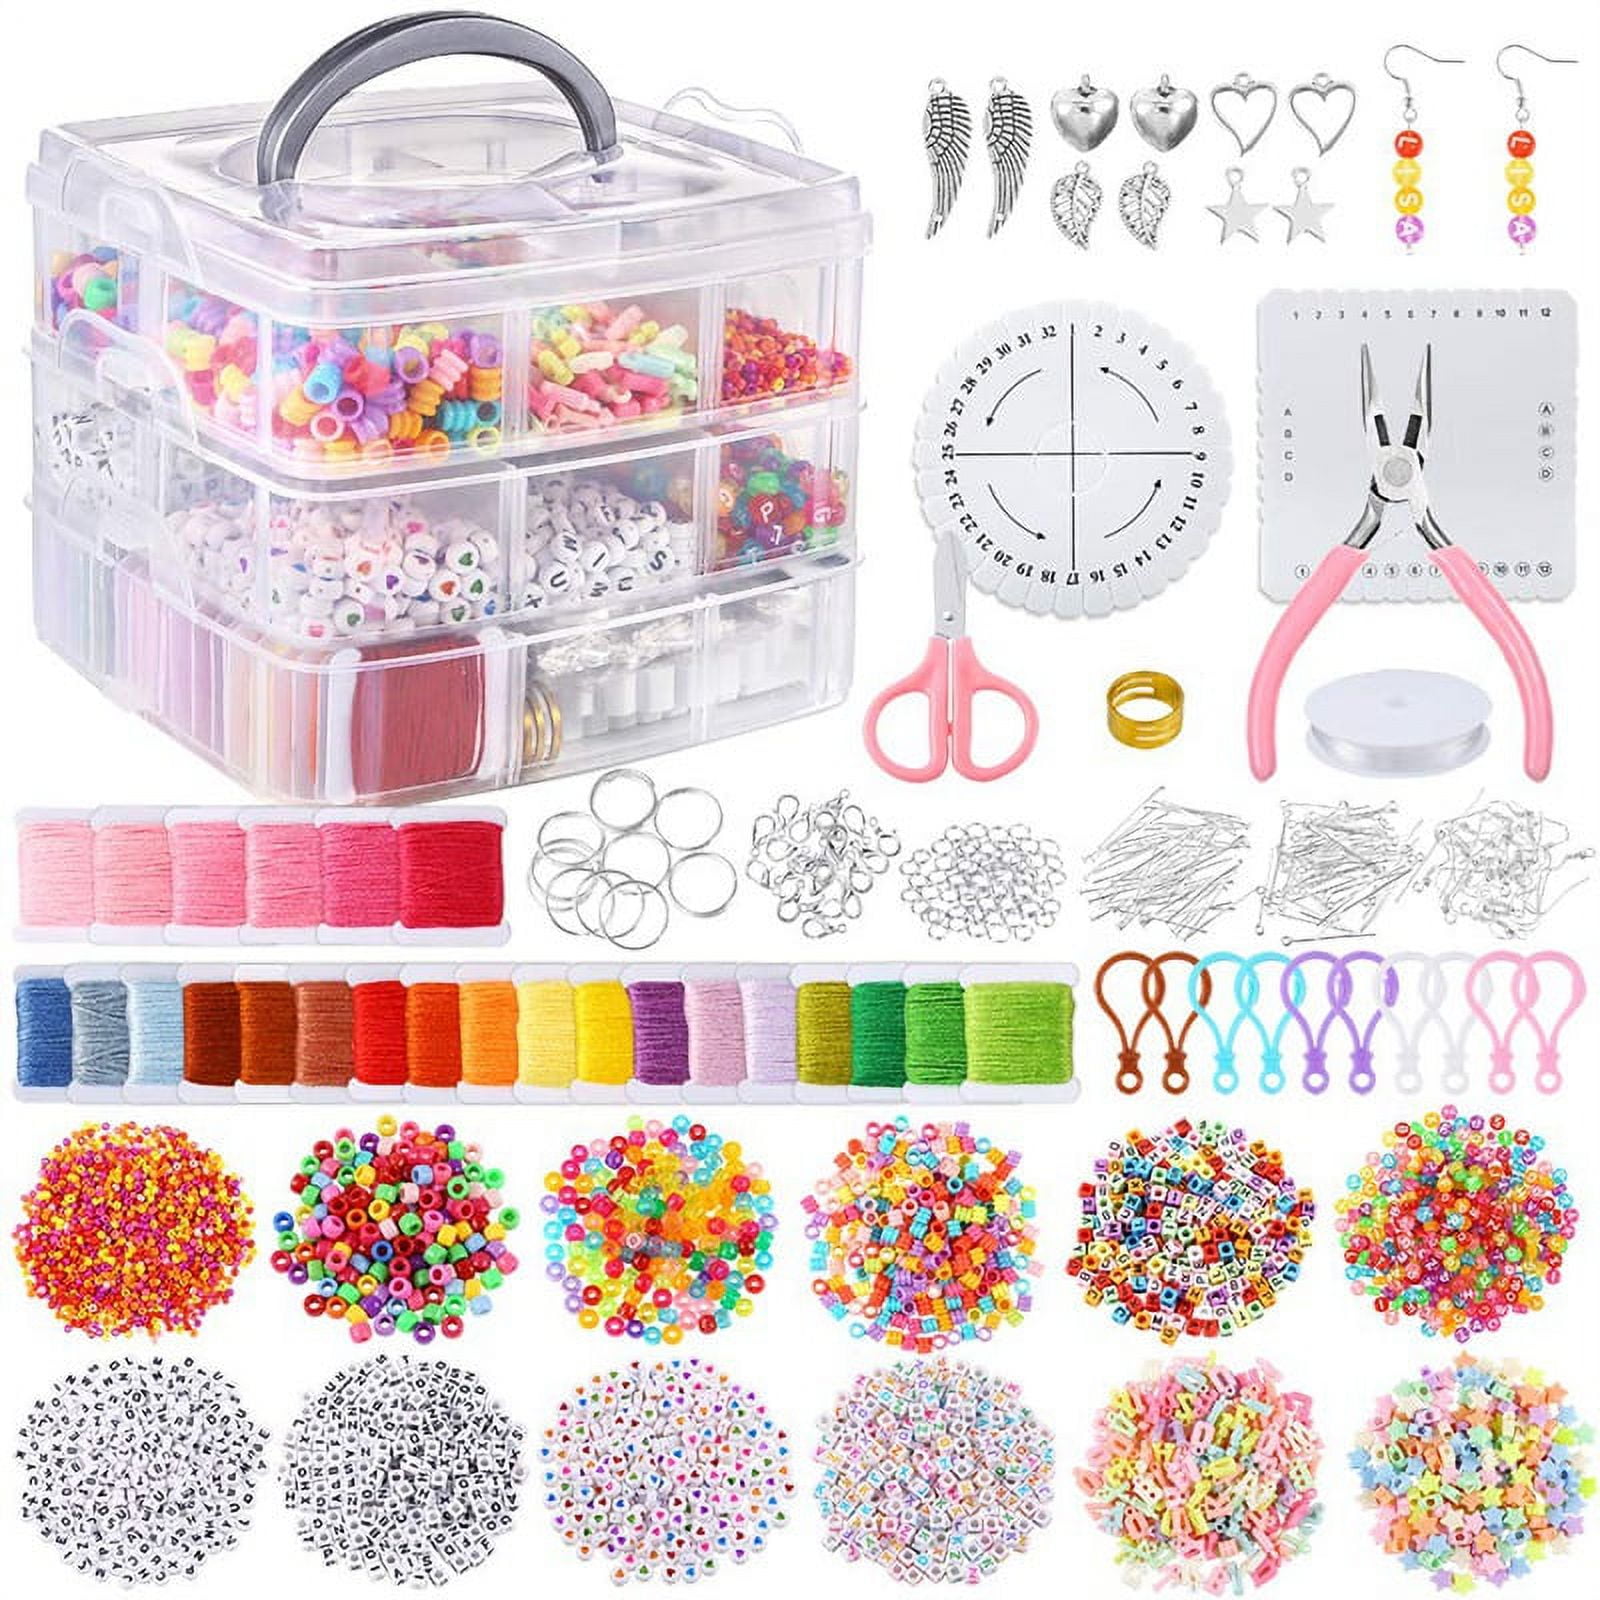 Everso Friendship Bracelet Making Kit, Crafts For Girls, Multi-Color  Embroidery Floss, Knot Patterns, Colorful String, Bracelet Charms